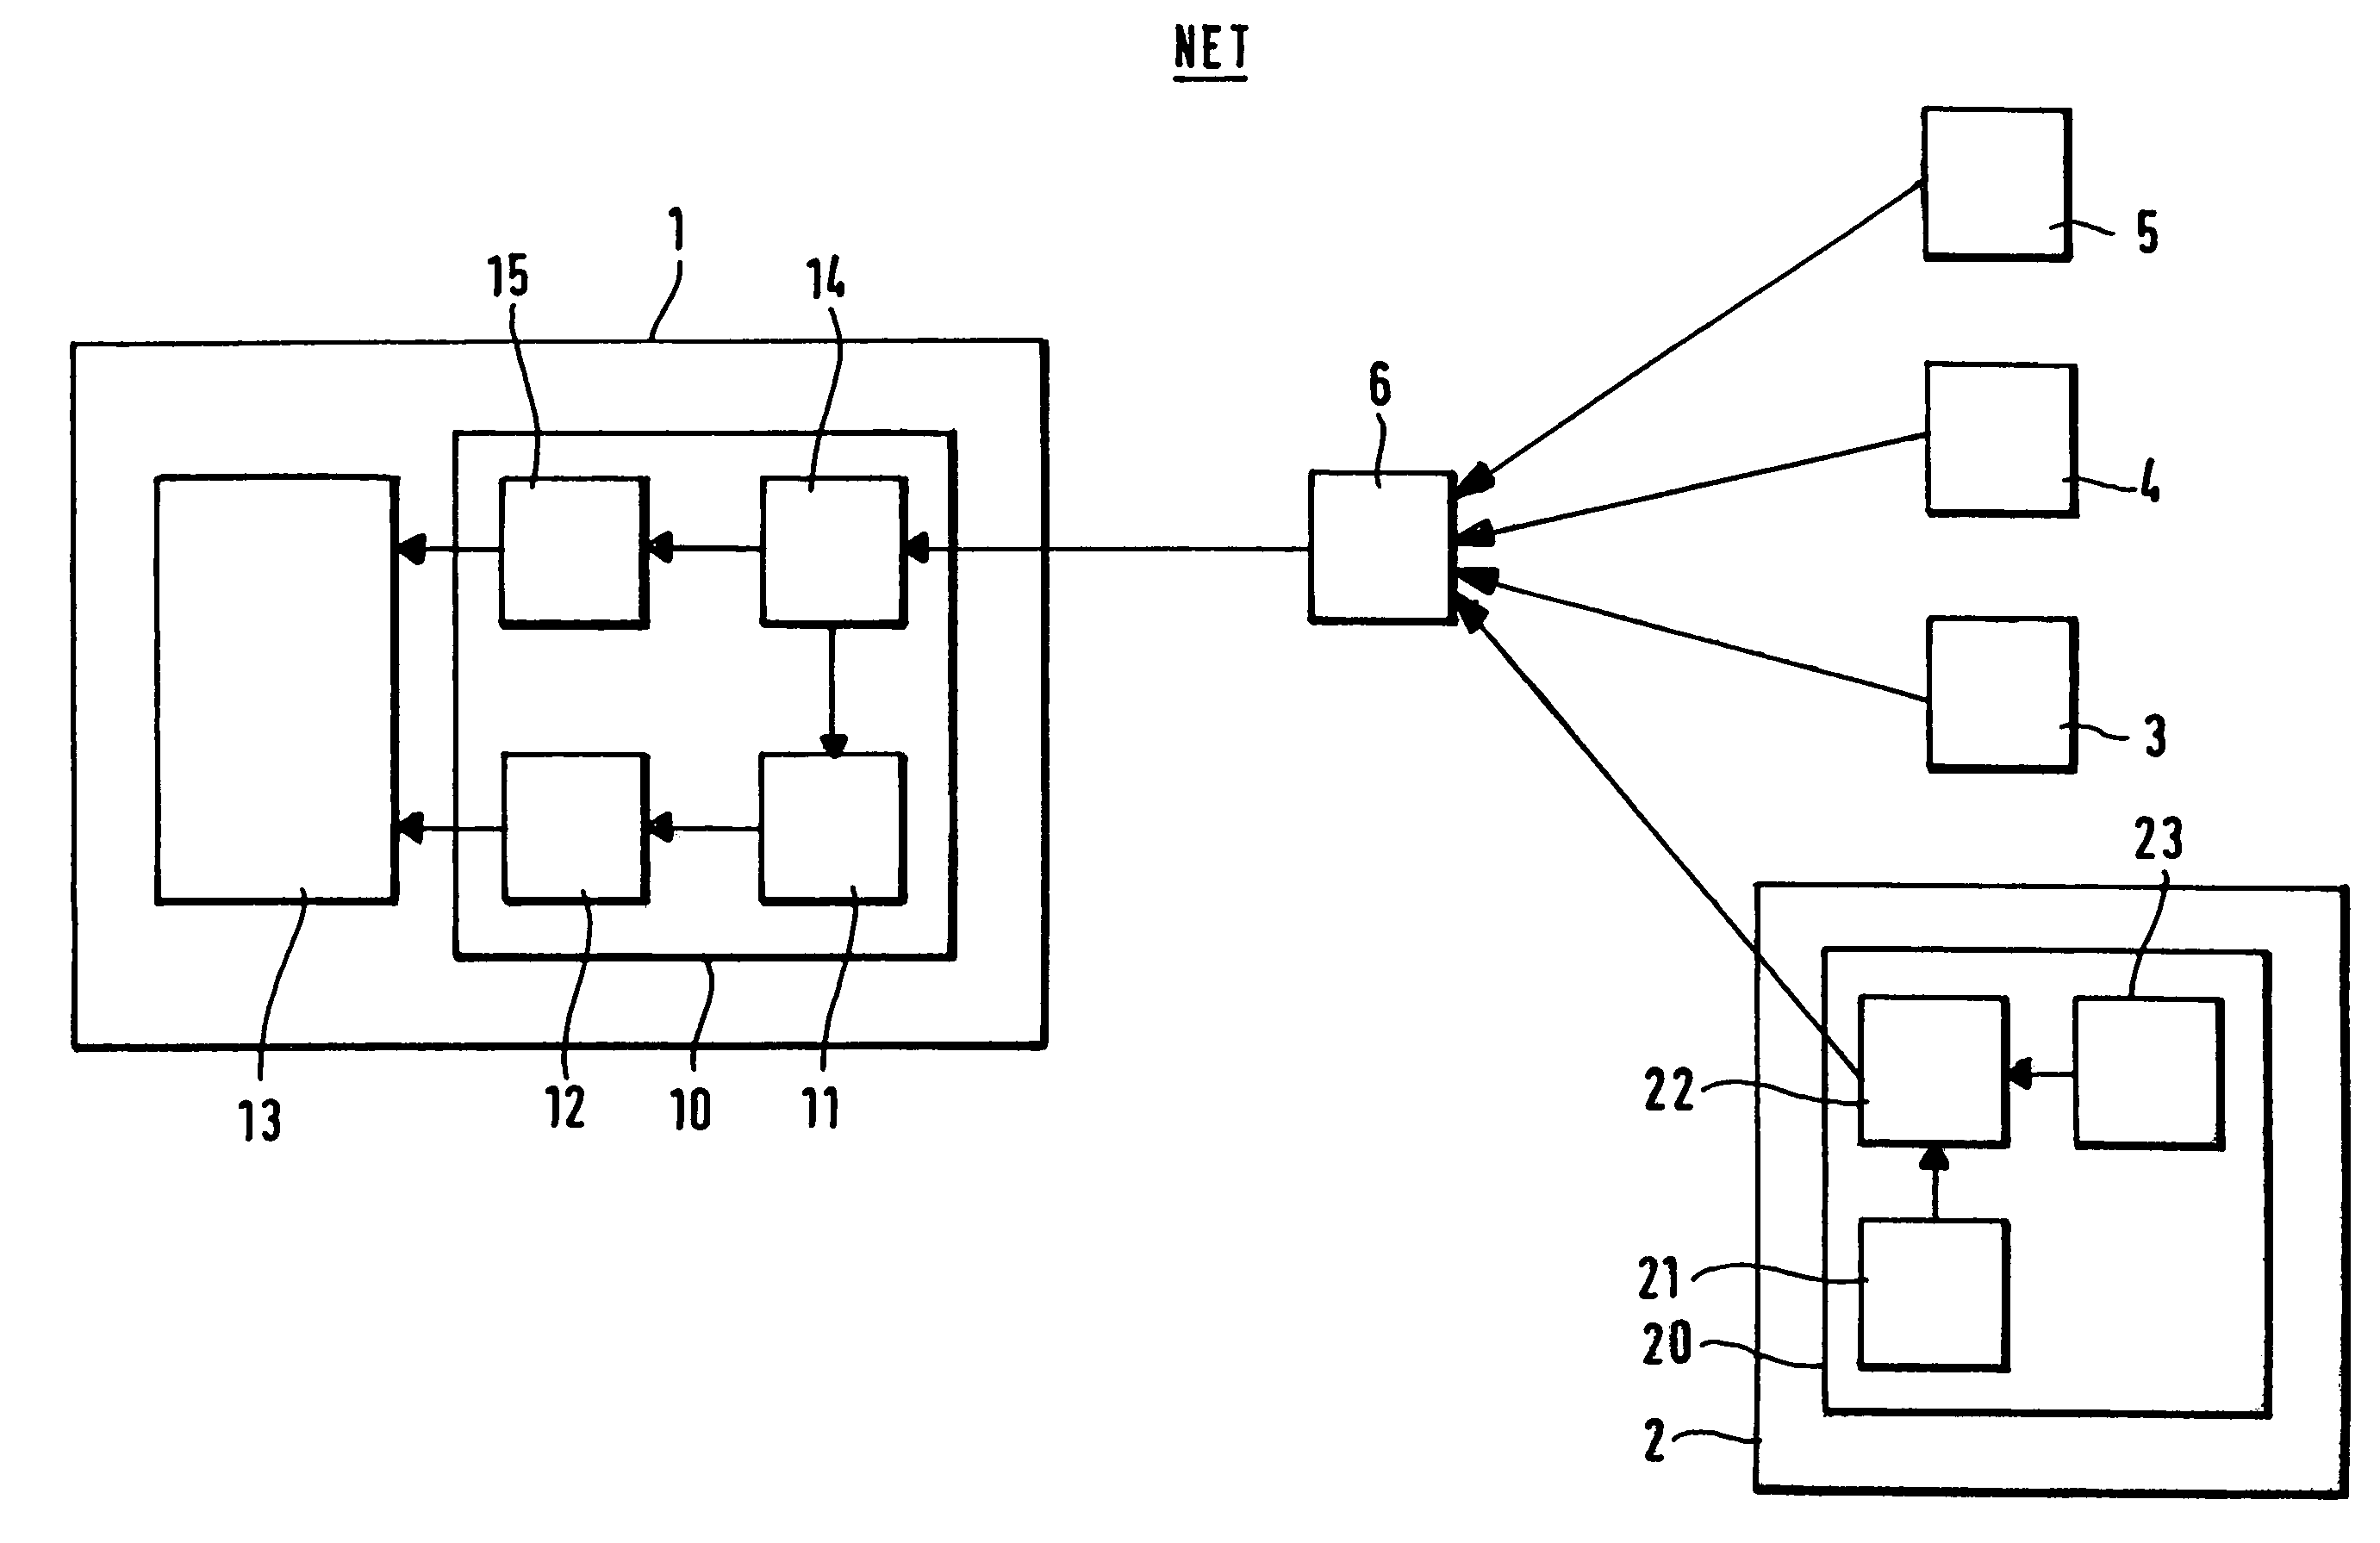 Transmitting facility and receiving facility for a multipoint-to-point synchronous CDMA network